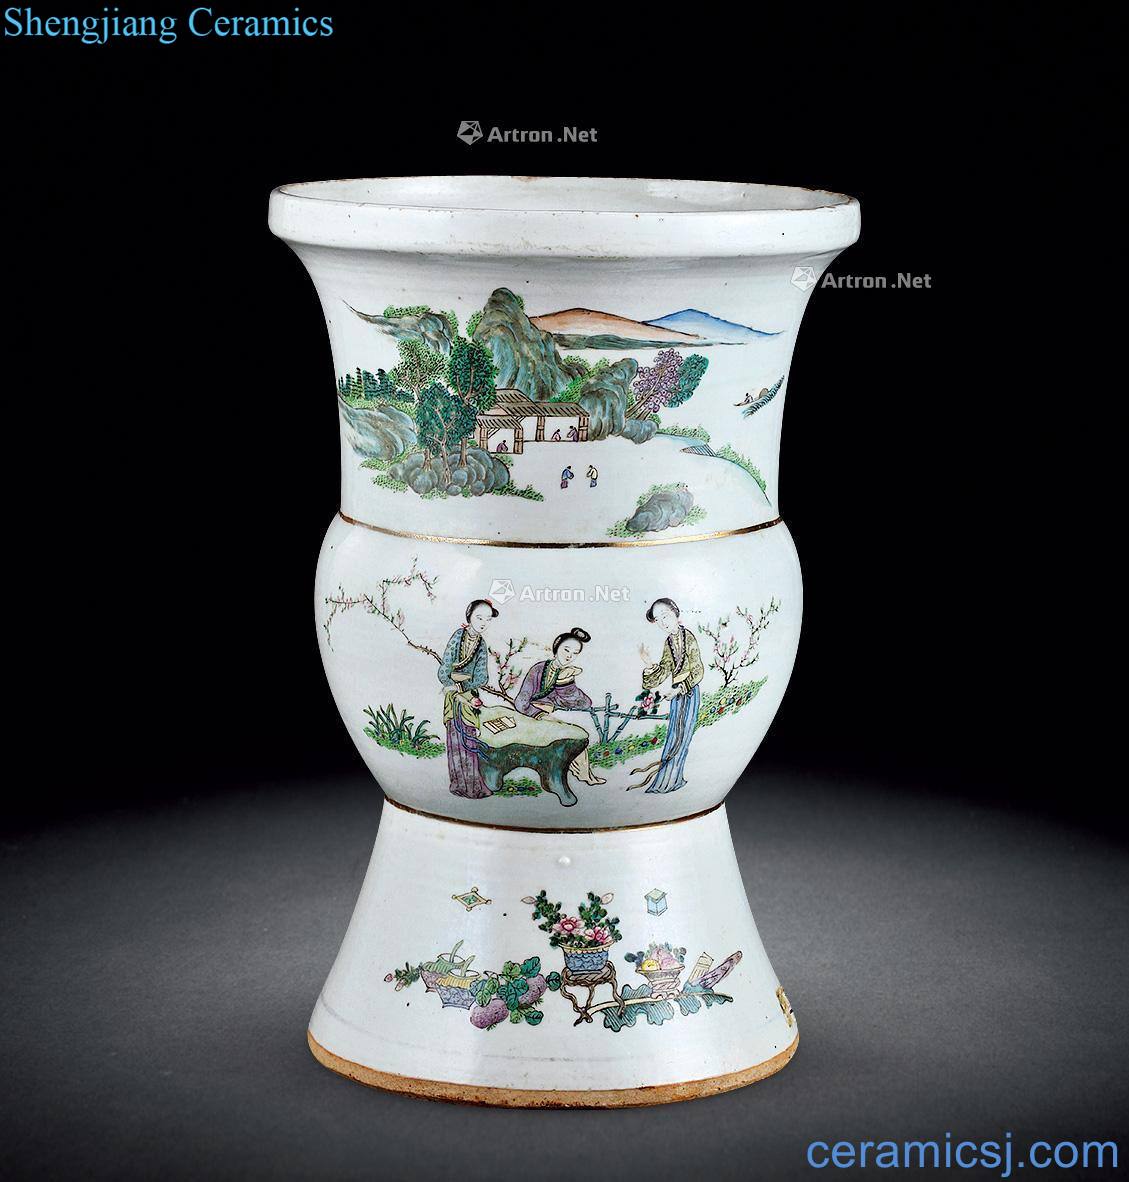 However, pastel flower vase with reign of qing emperor guangxu